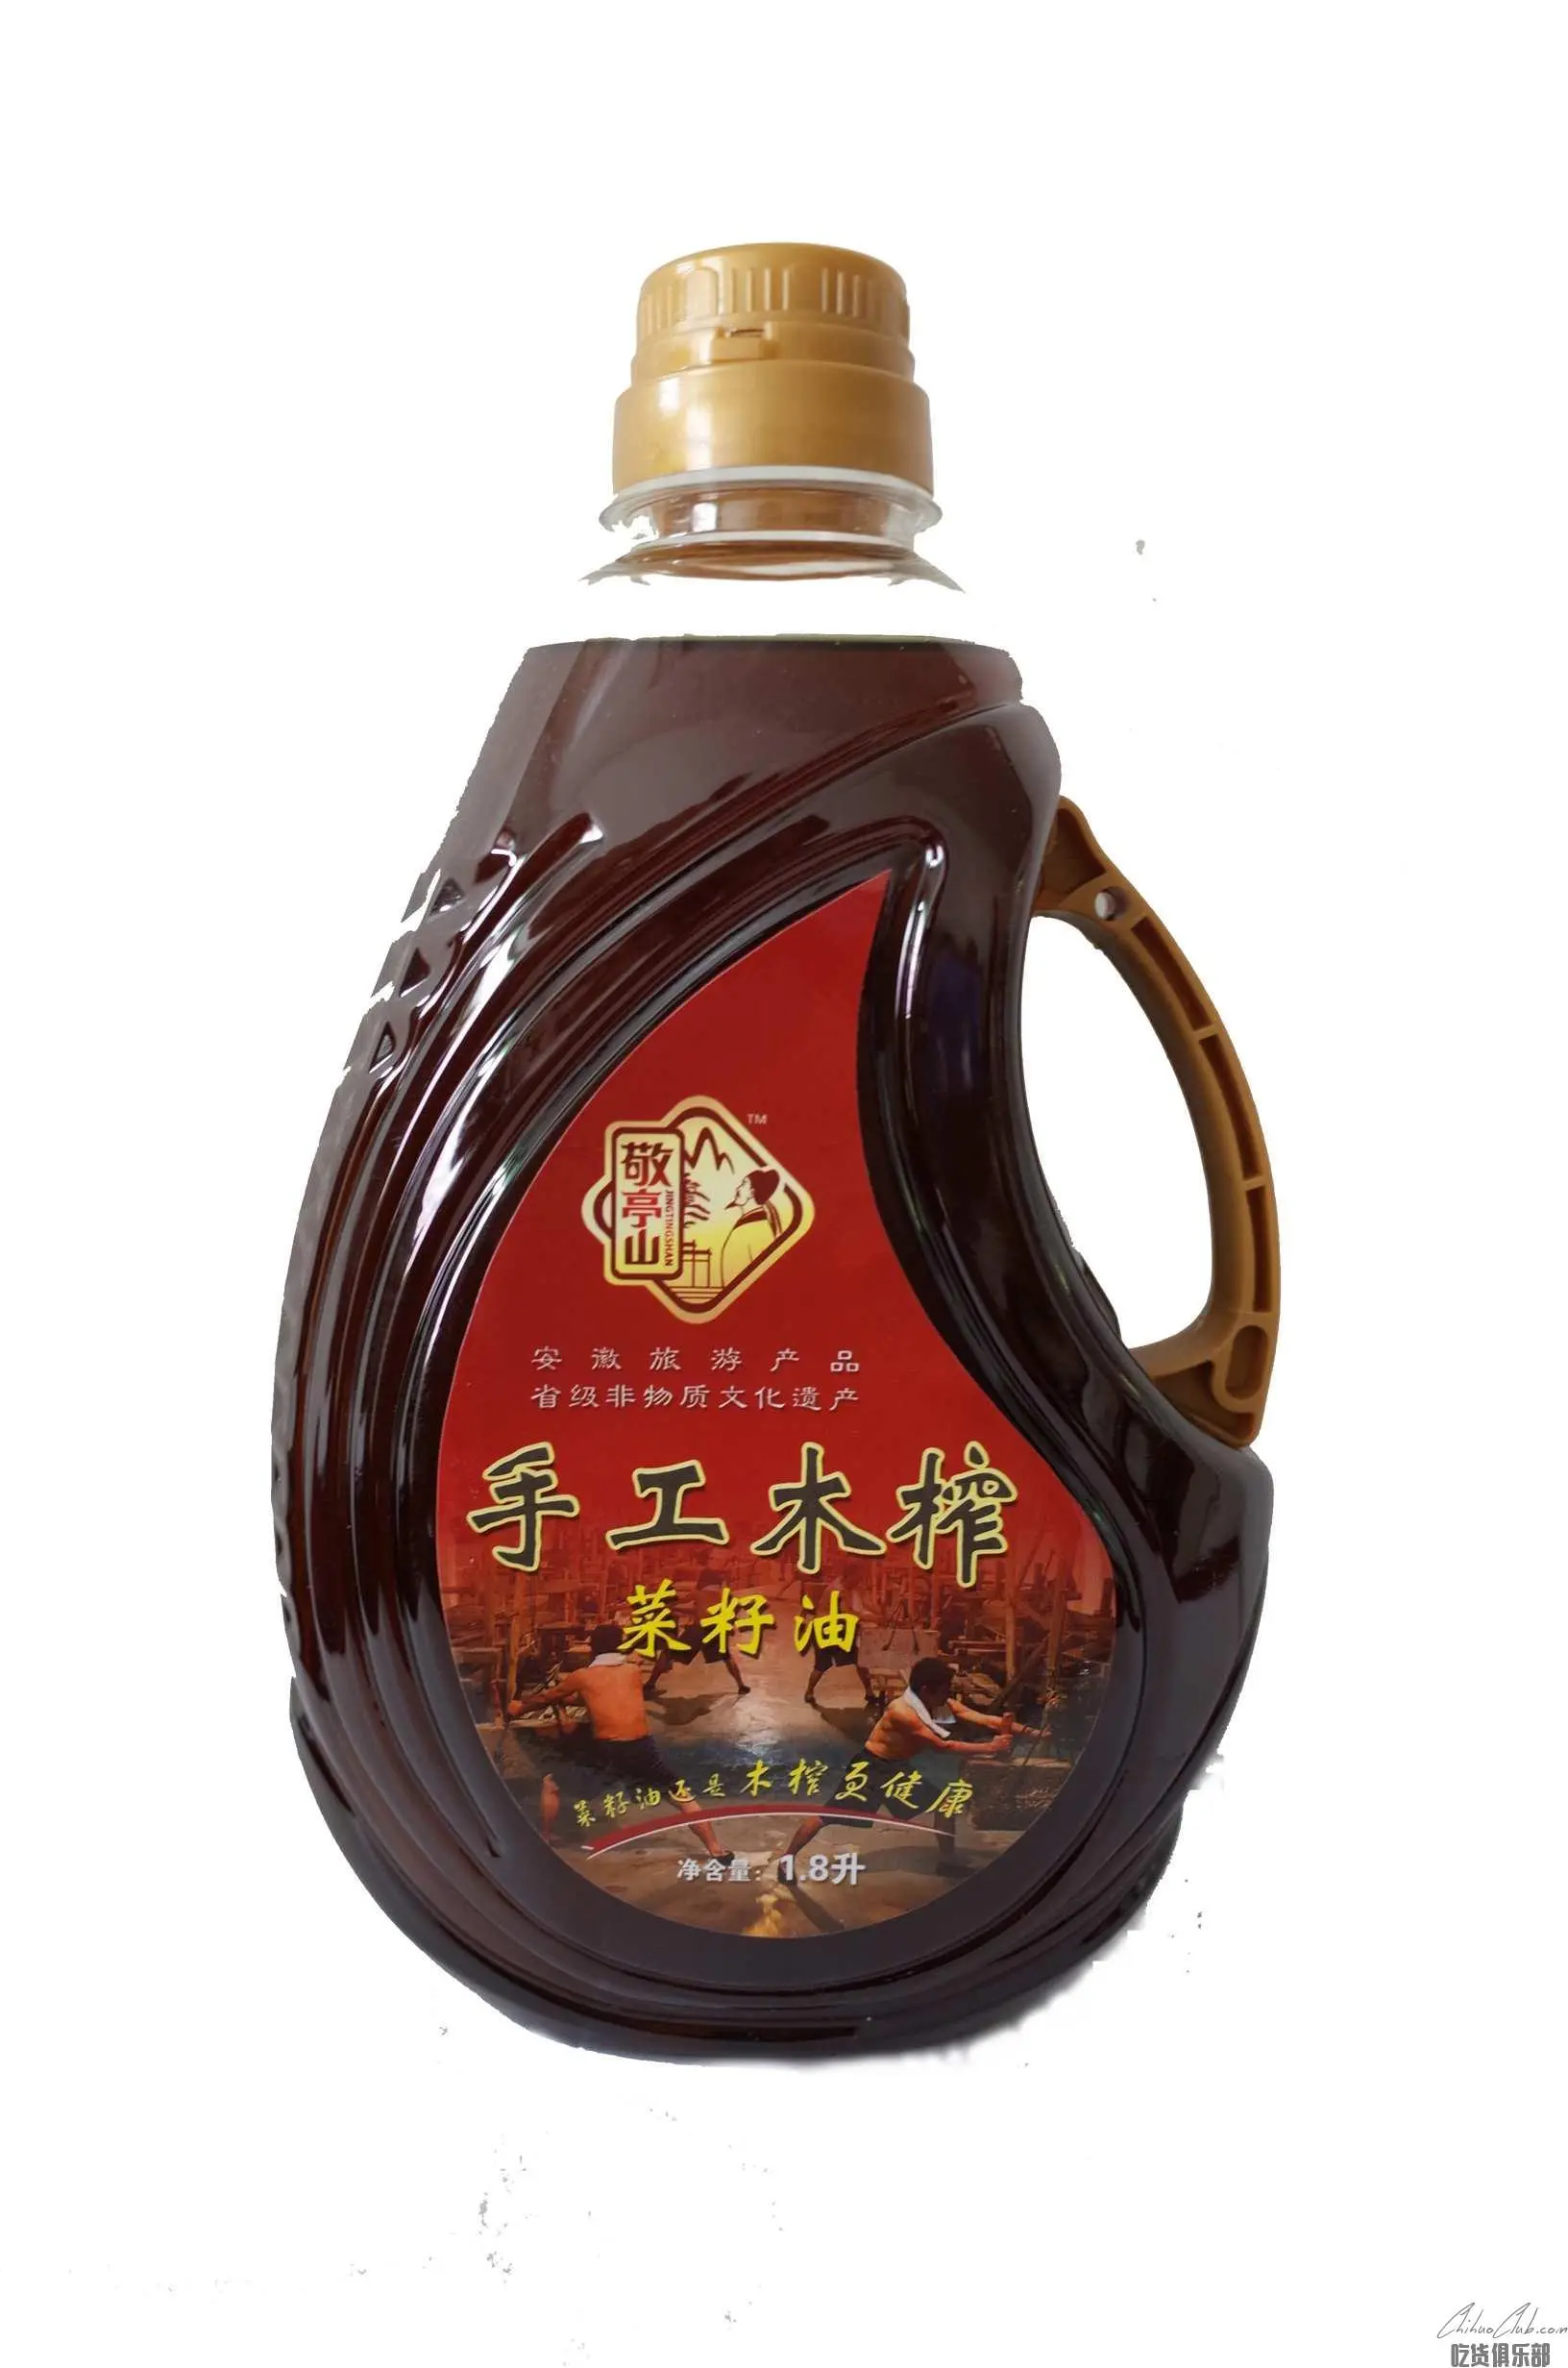 Xuancheng wood pressing Oil